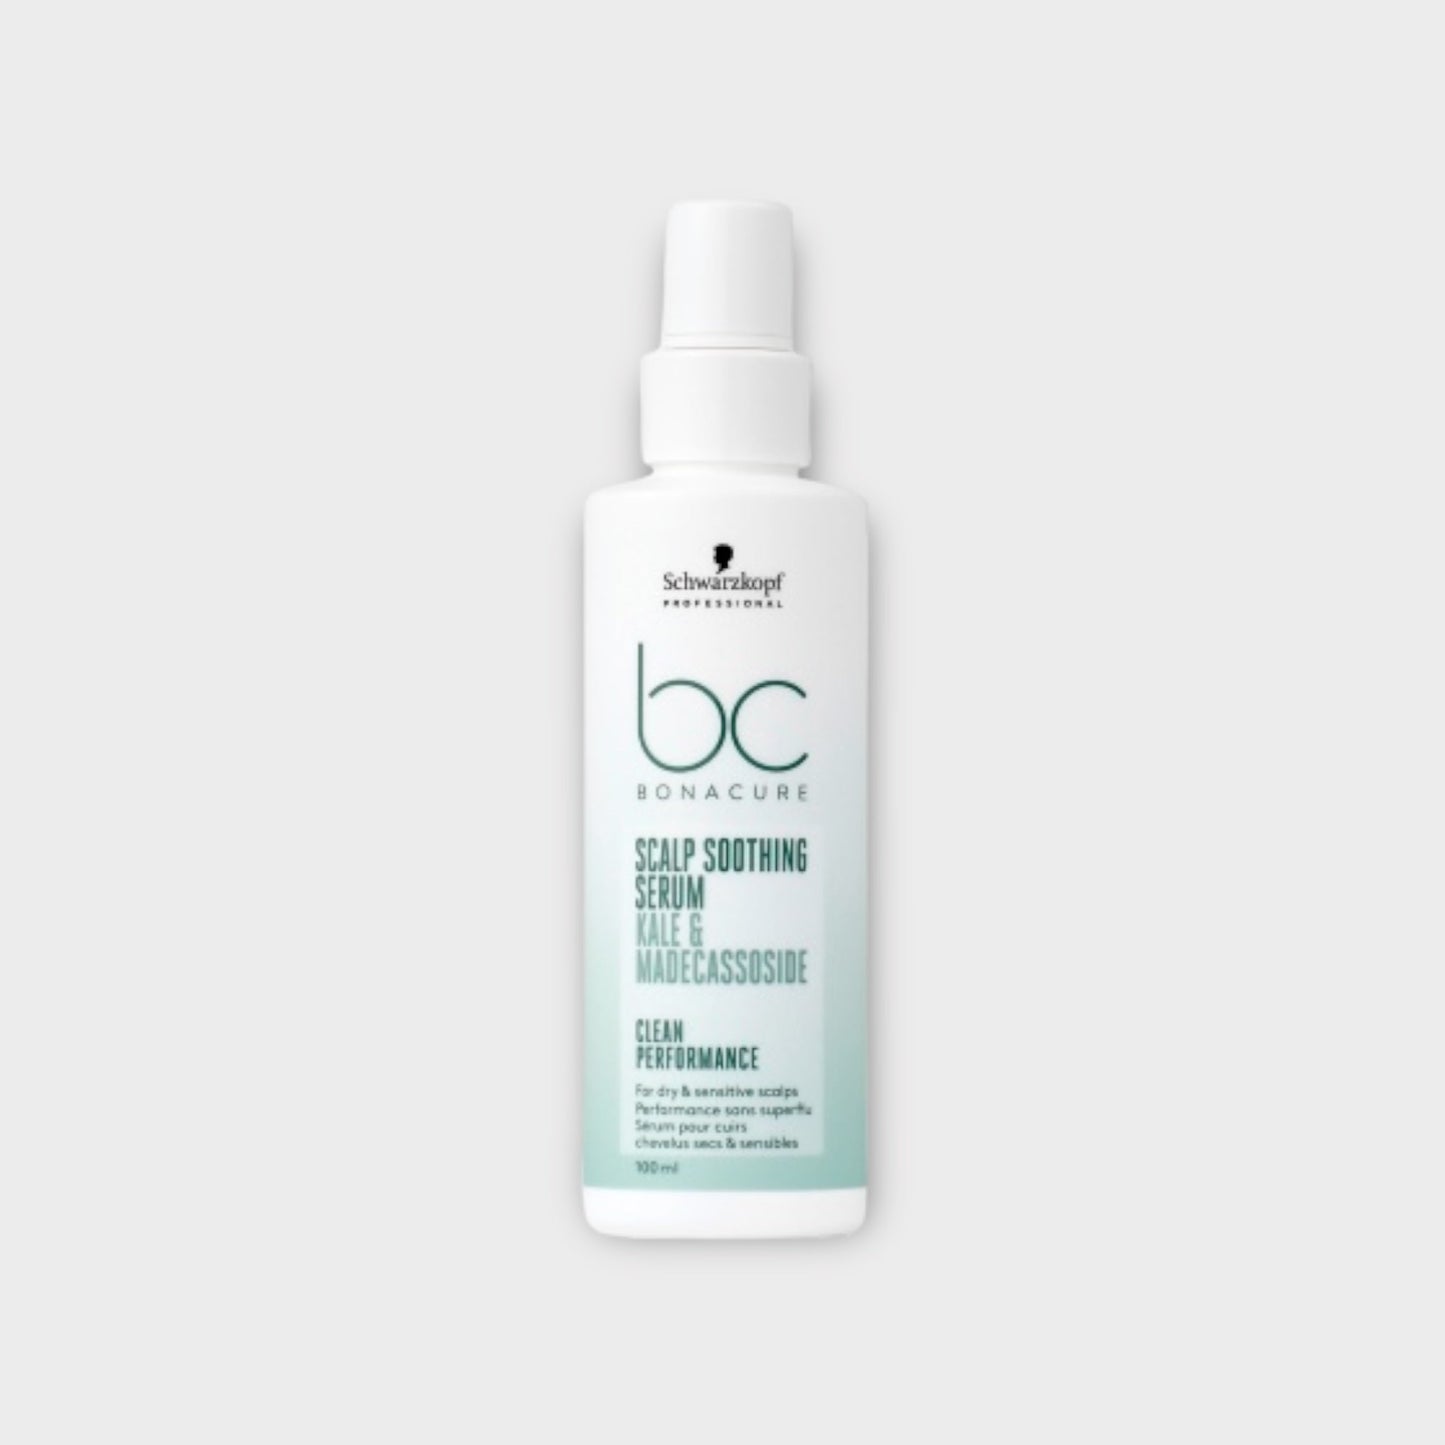 Bonacure Scalp Soothing Serum - 100 ml - Wash it Out